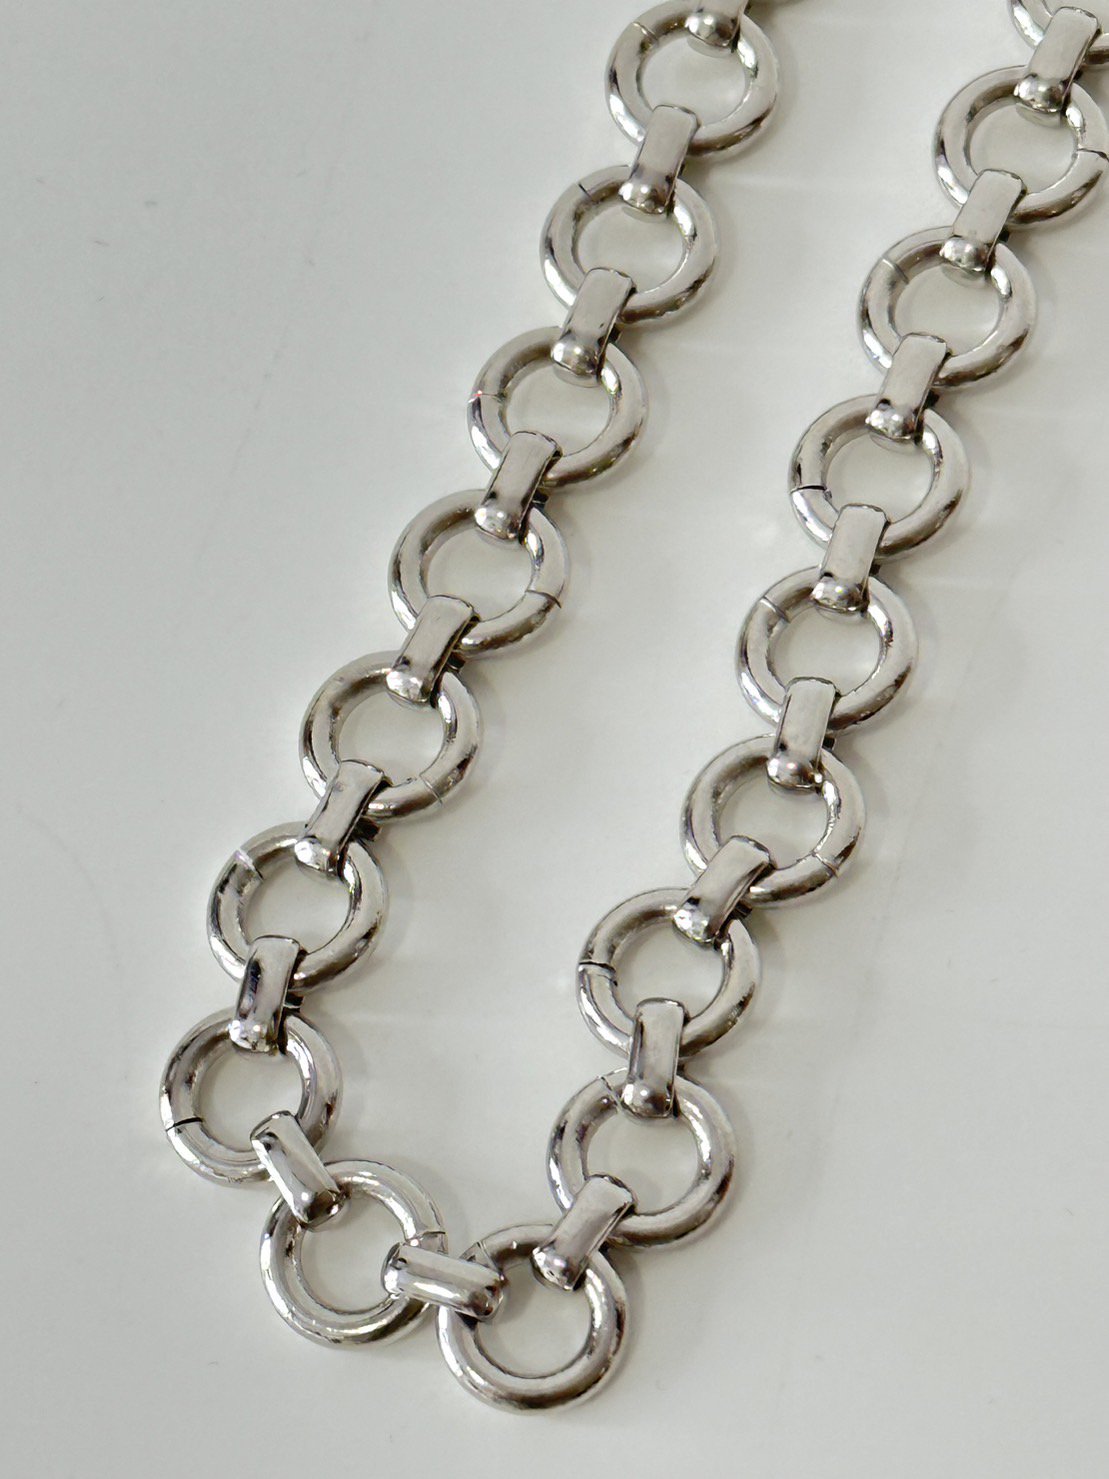 LITTLEBIG<br />Circle Necklace / Silver<img class='new_mark_img2' src='https://img.shop-pro.jp/img/new/icons14.gif' style='border:none;display:inline;margin:0px;padding:0px;width:auto;' />